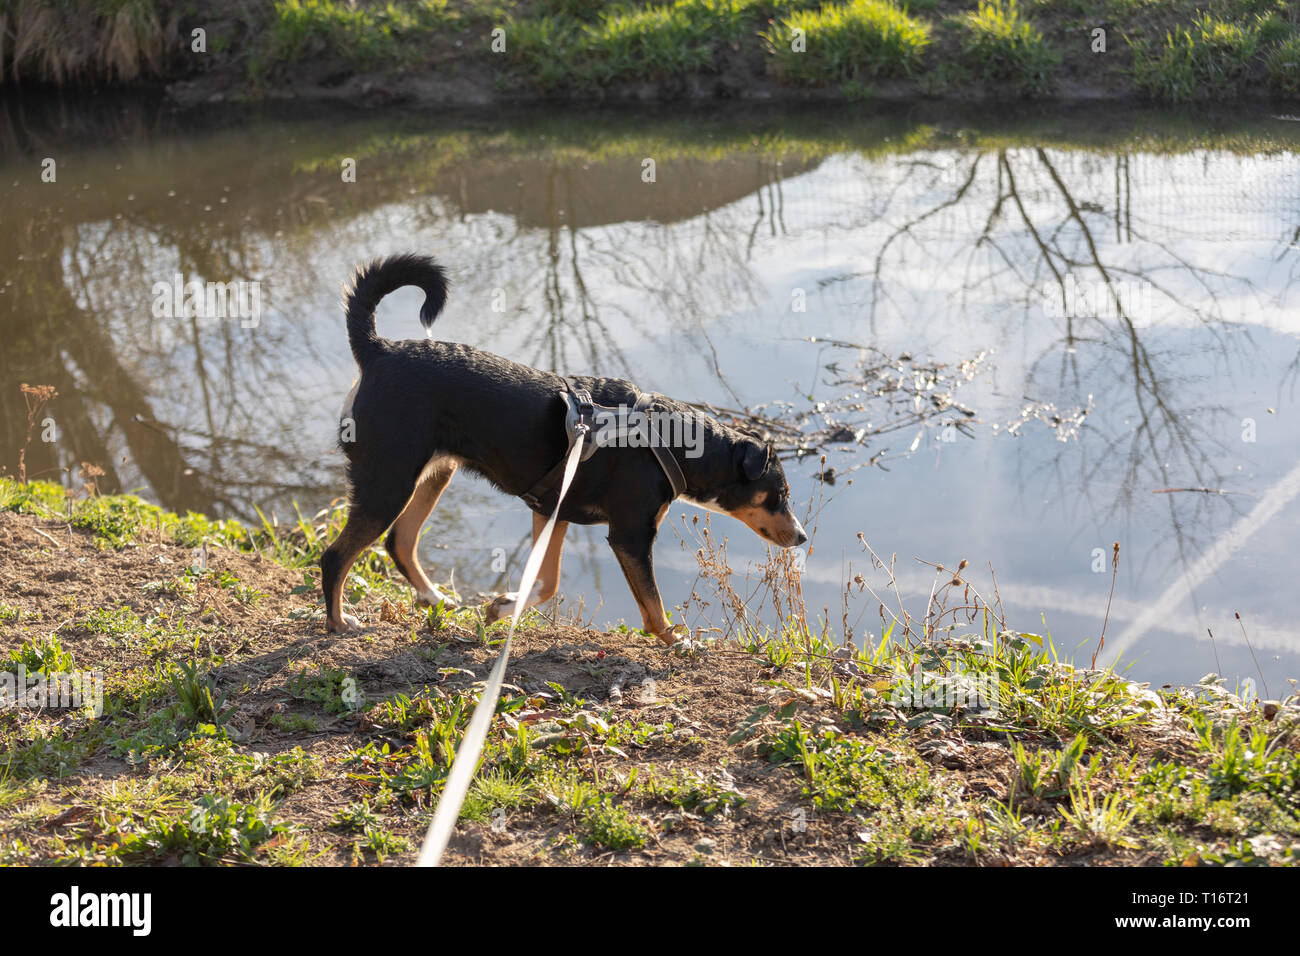 Adorable appenzeller mountain dog is standing on a lake in park Stock Photo